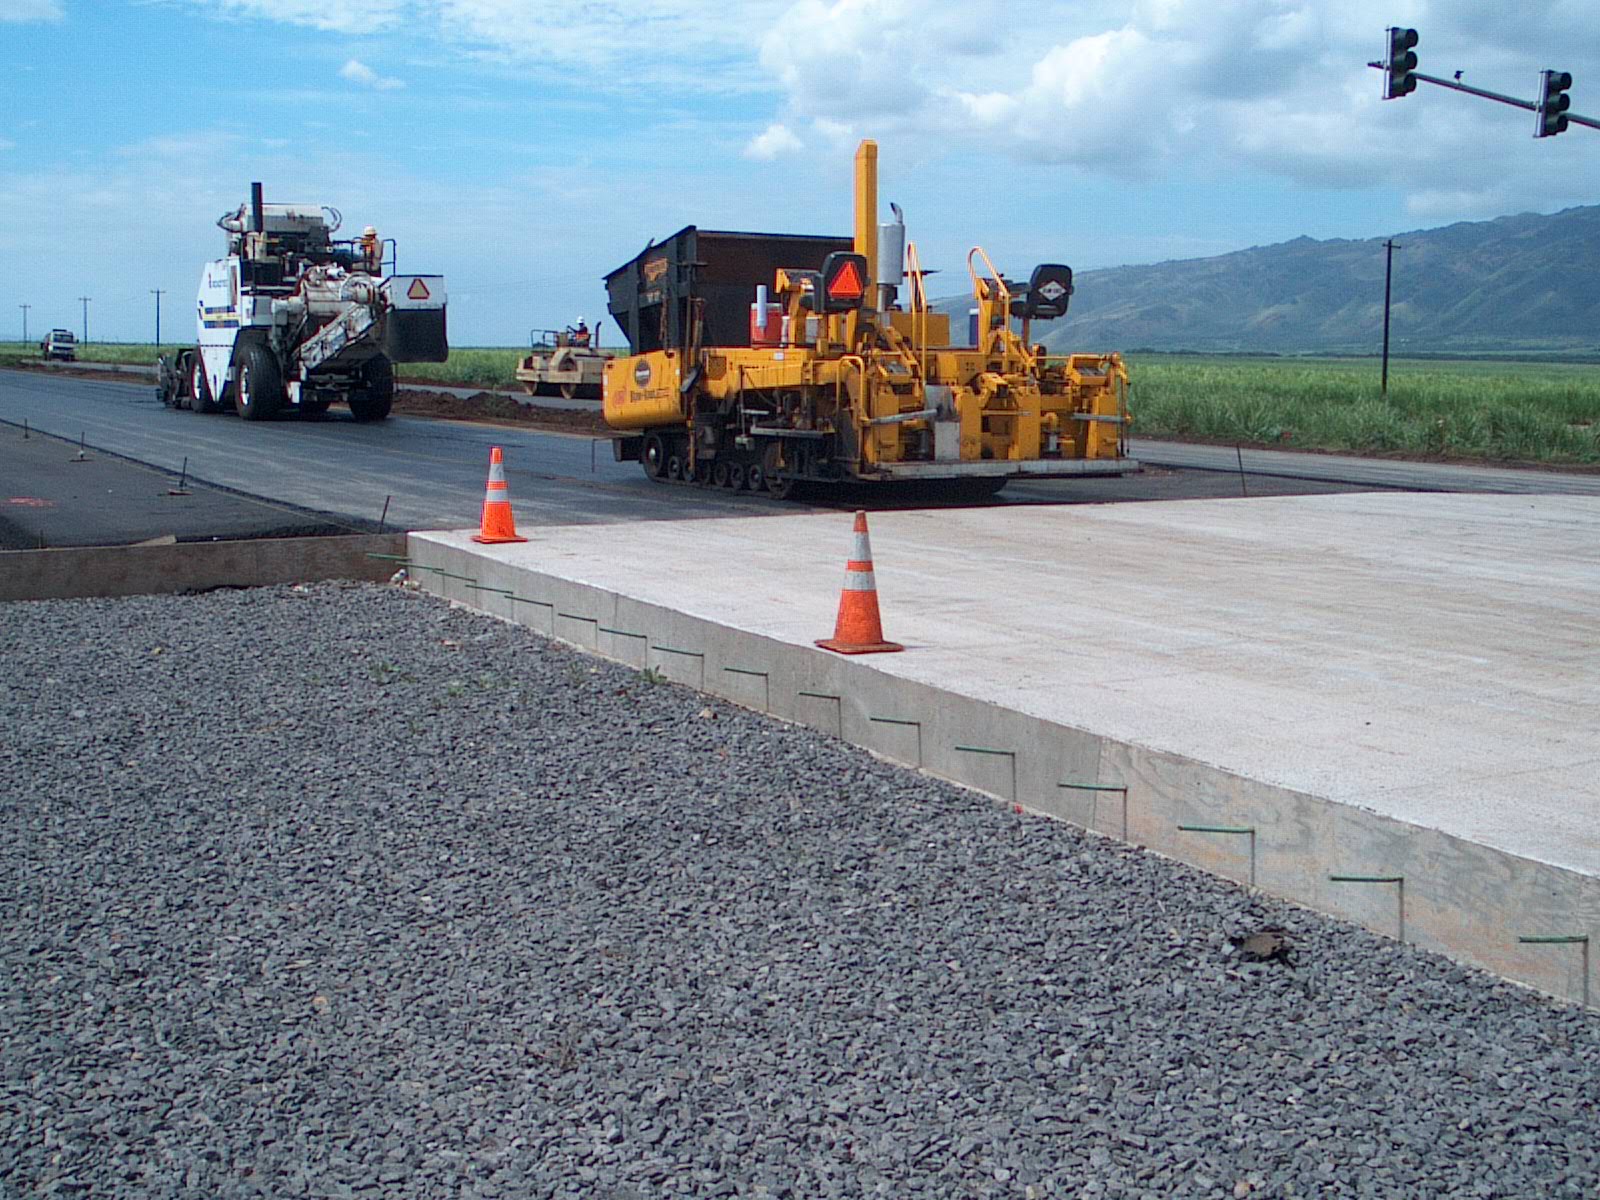 This crossing was built with a 16-inch concrete slab to handle unusually heavy loads.